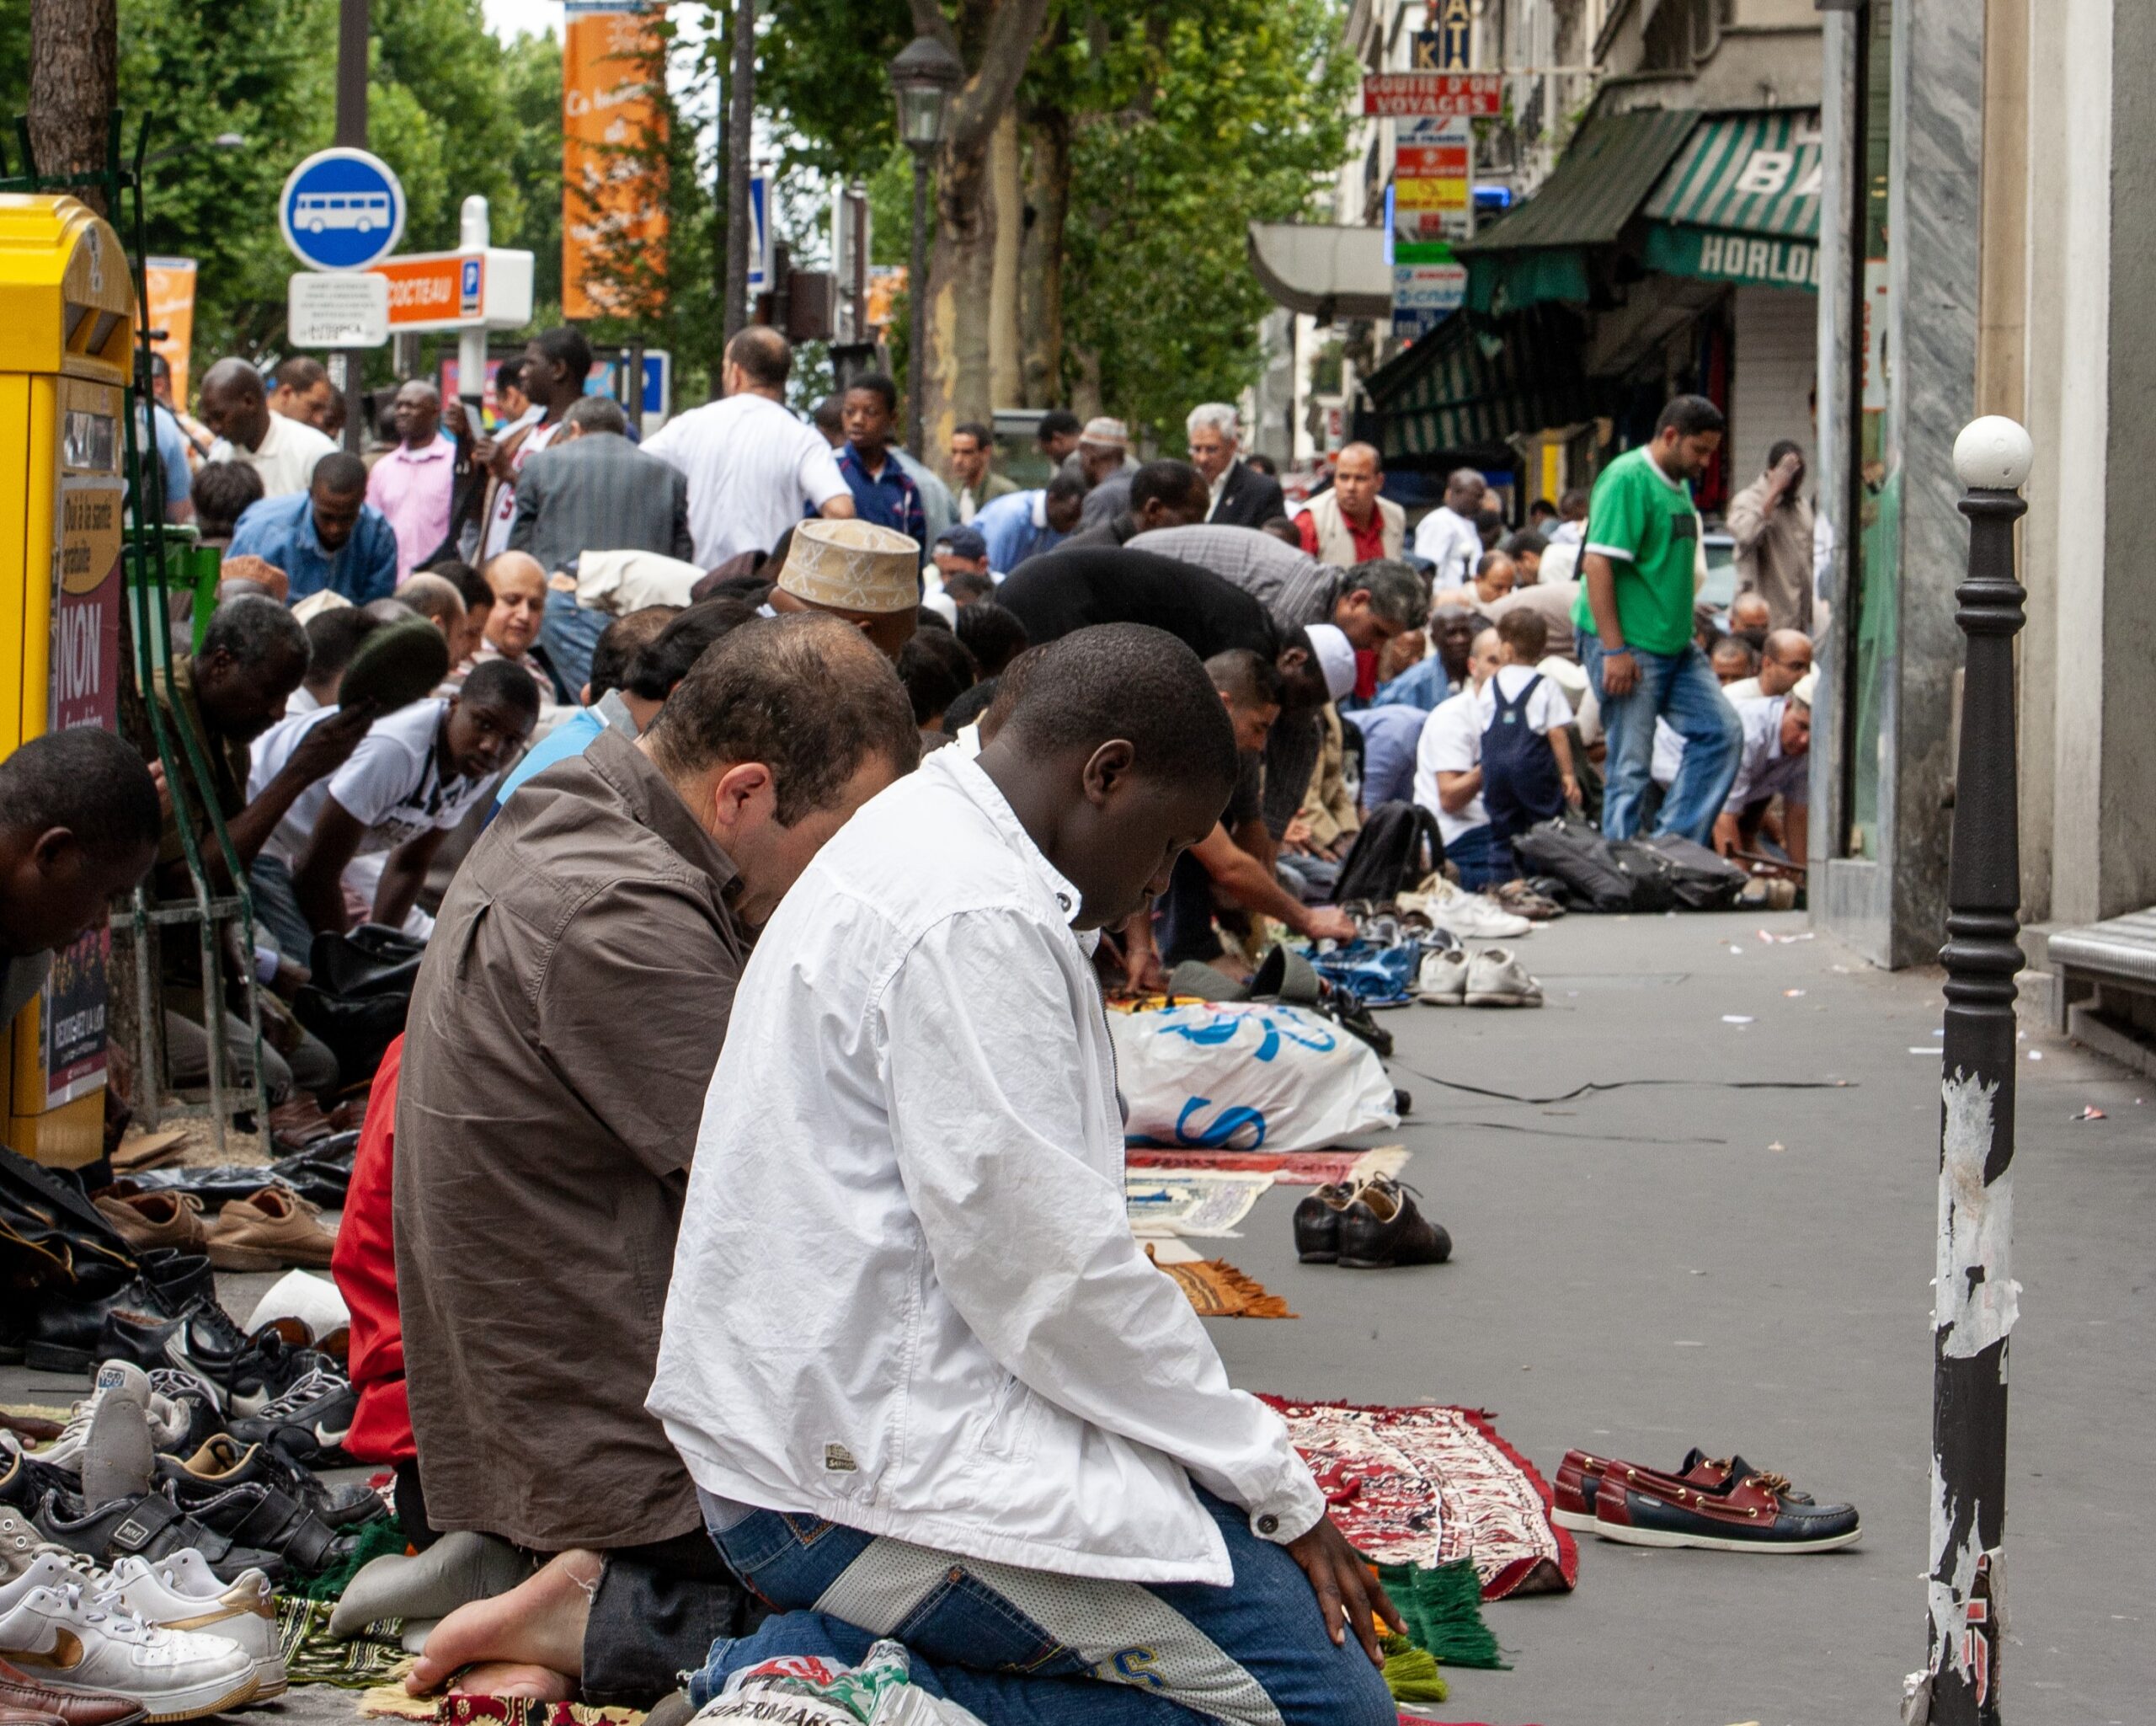 Pausing for Friday noon prayers, Muslims line the sidewalks near a mosque in Paris. IMB Photo